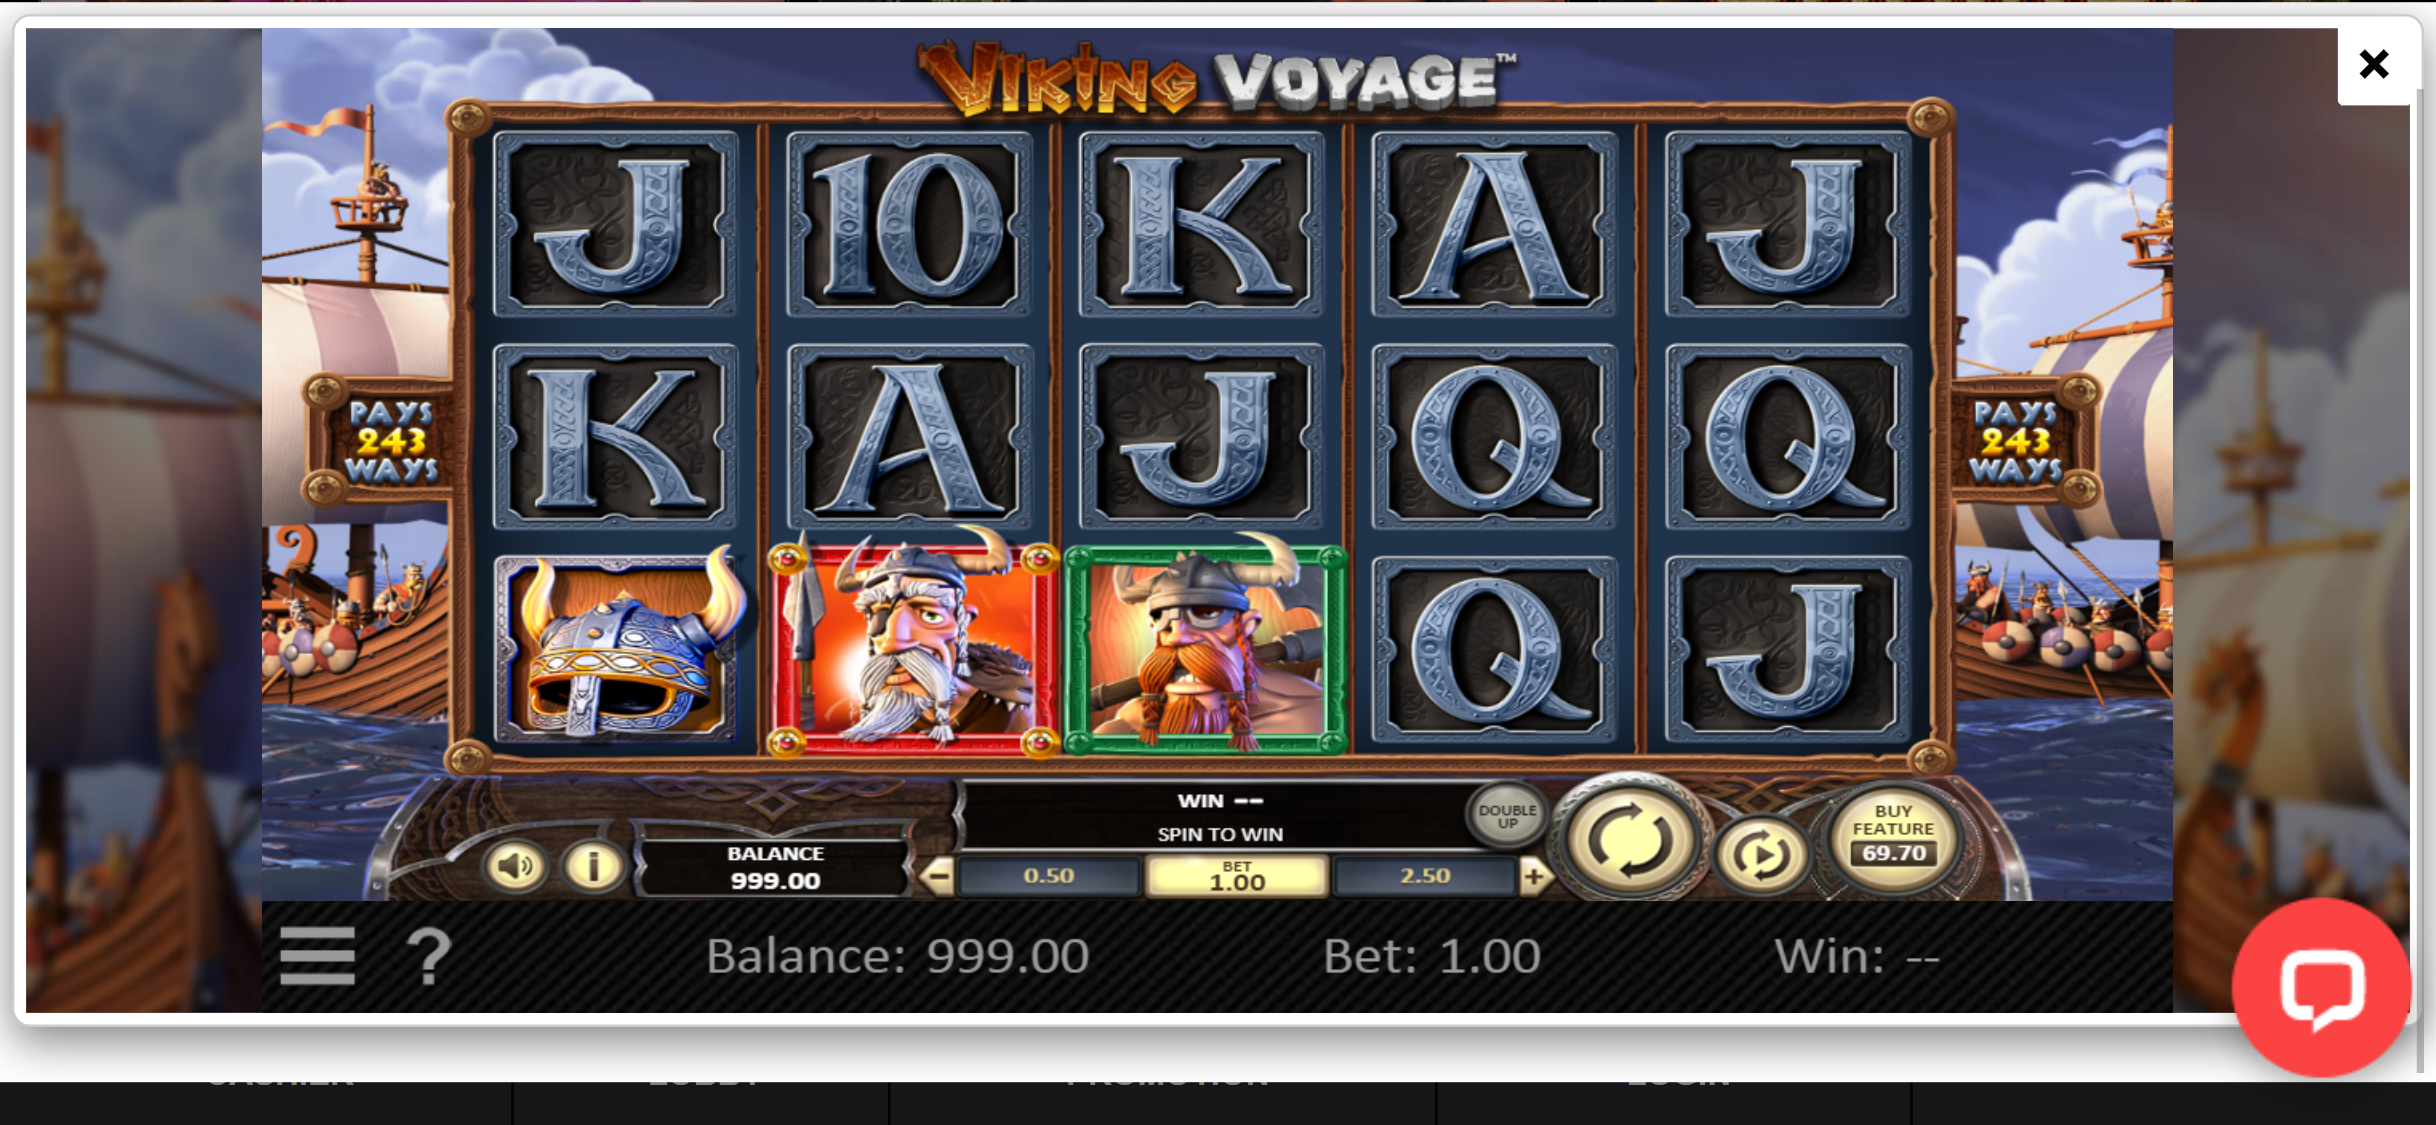 VIP Club Player Casino Mobile Slot Games Review